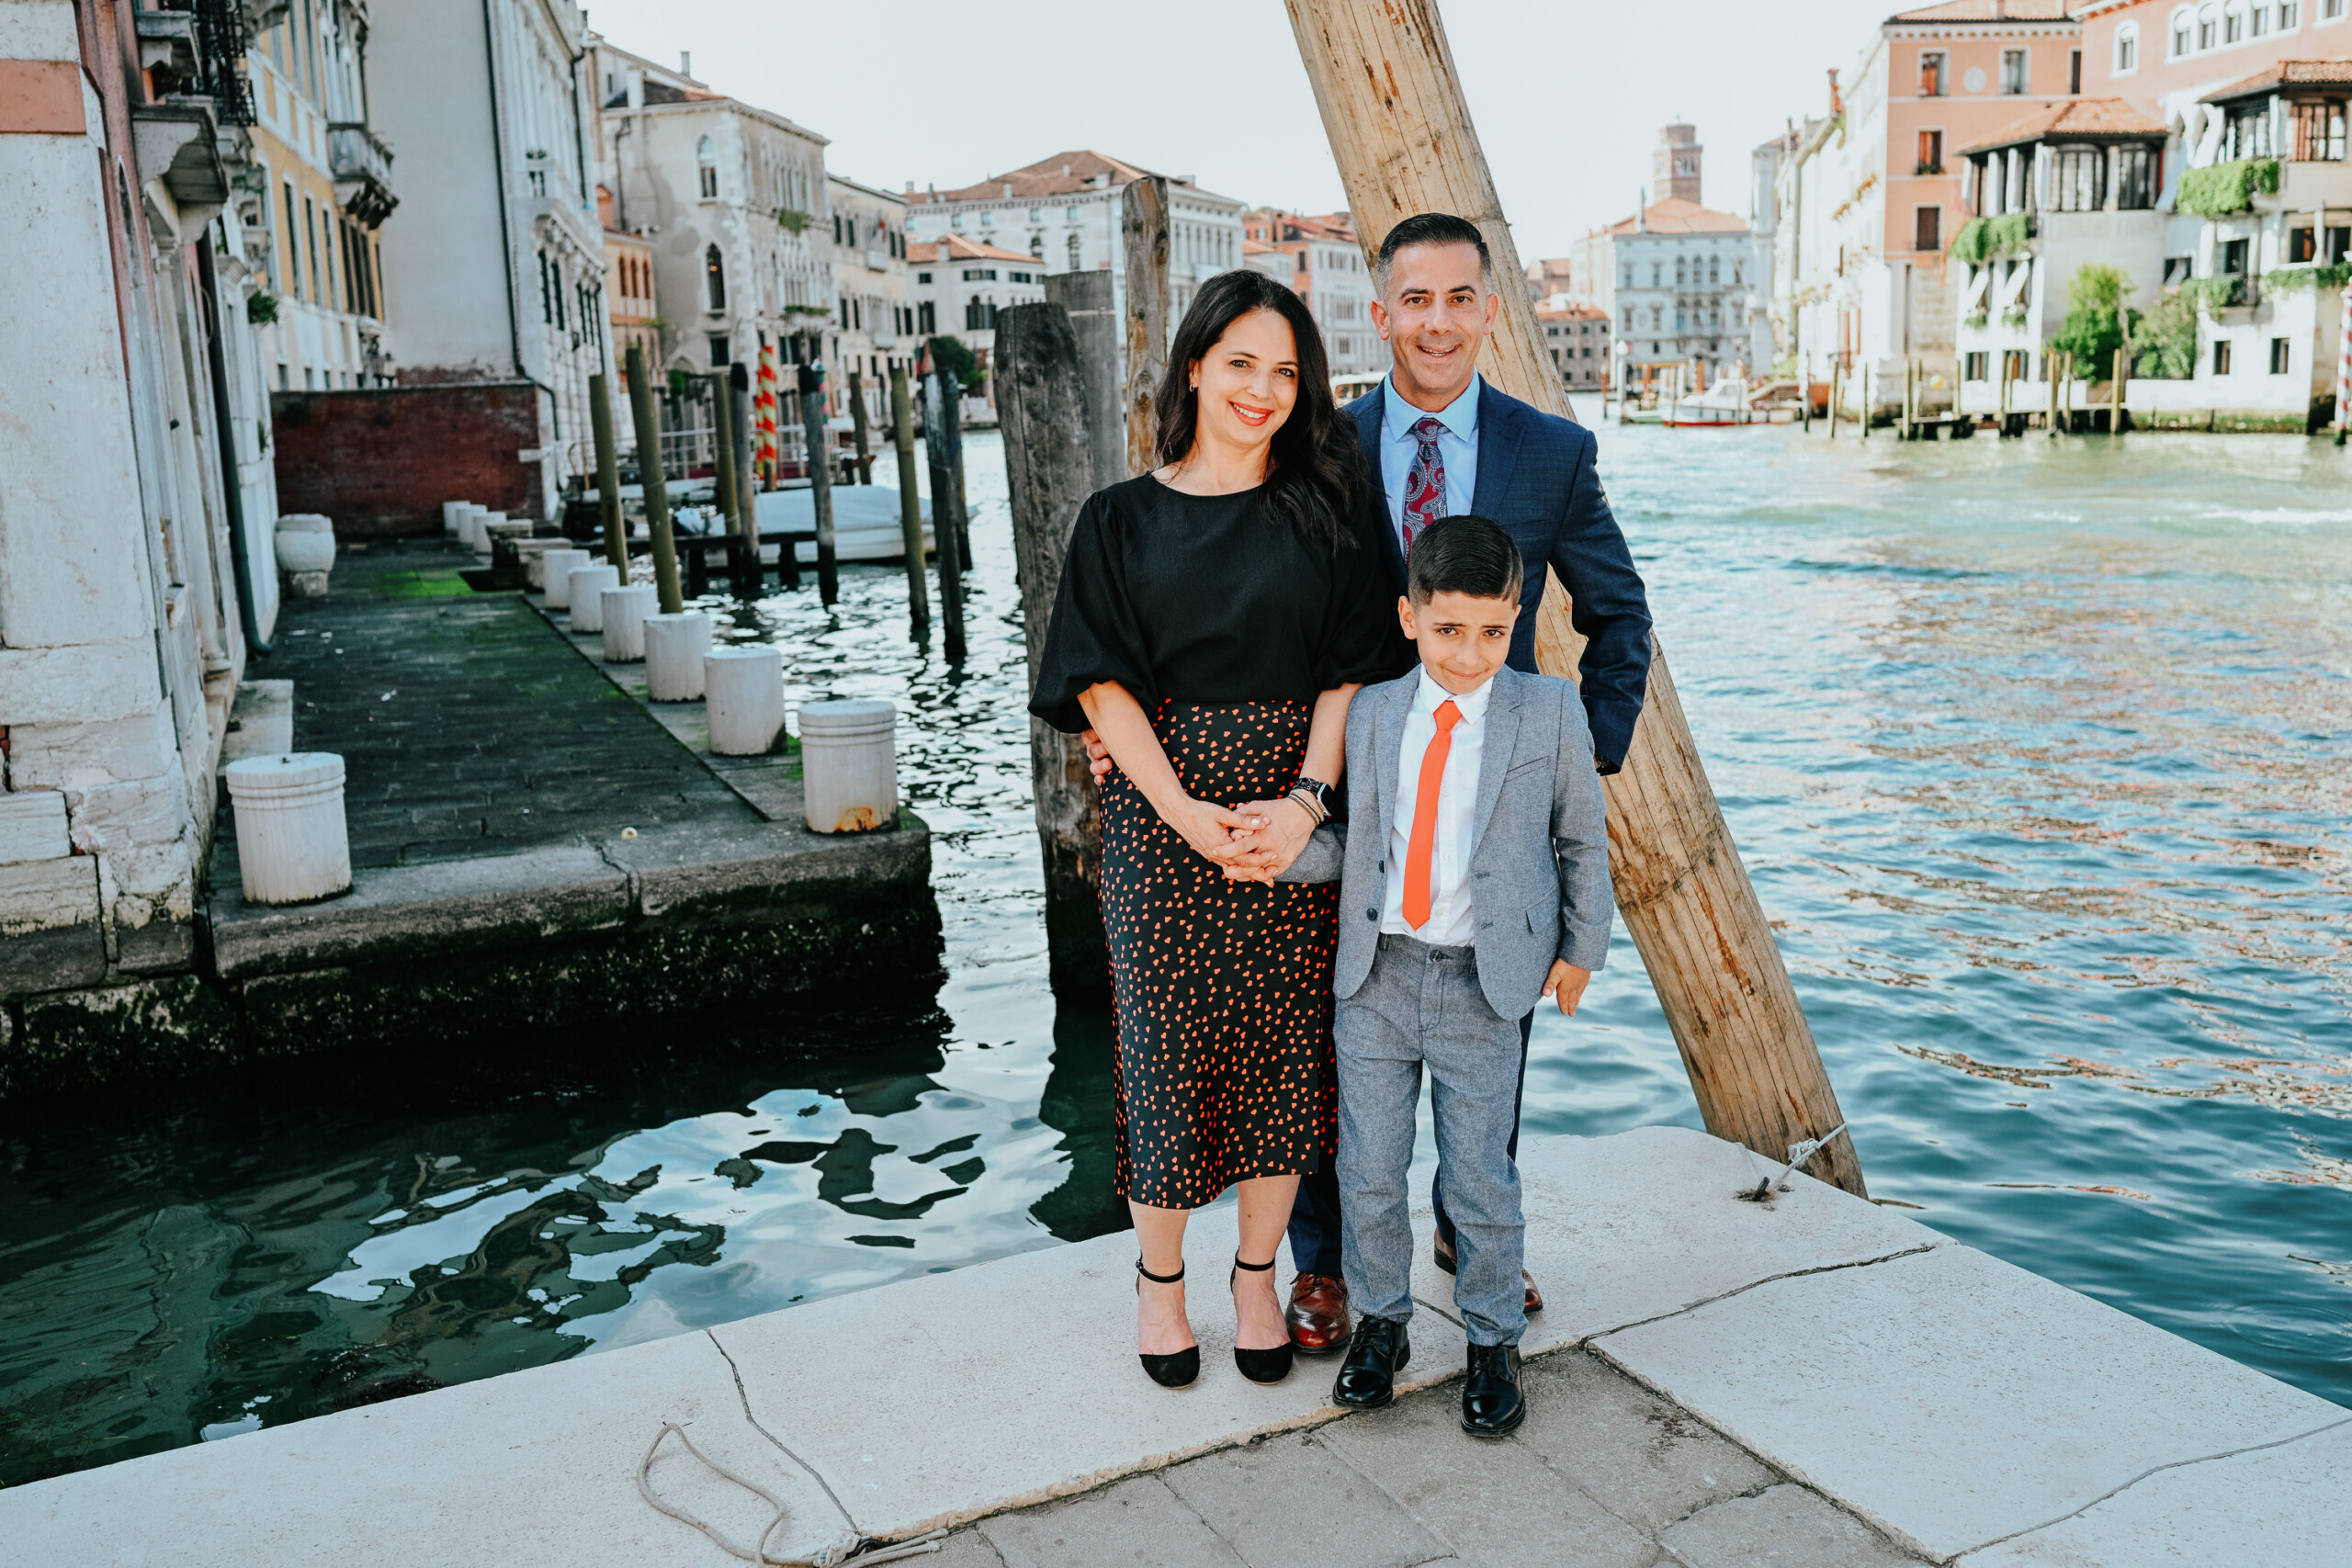 Family photoshoot by Bethina, Localgrapher in Venice